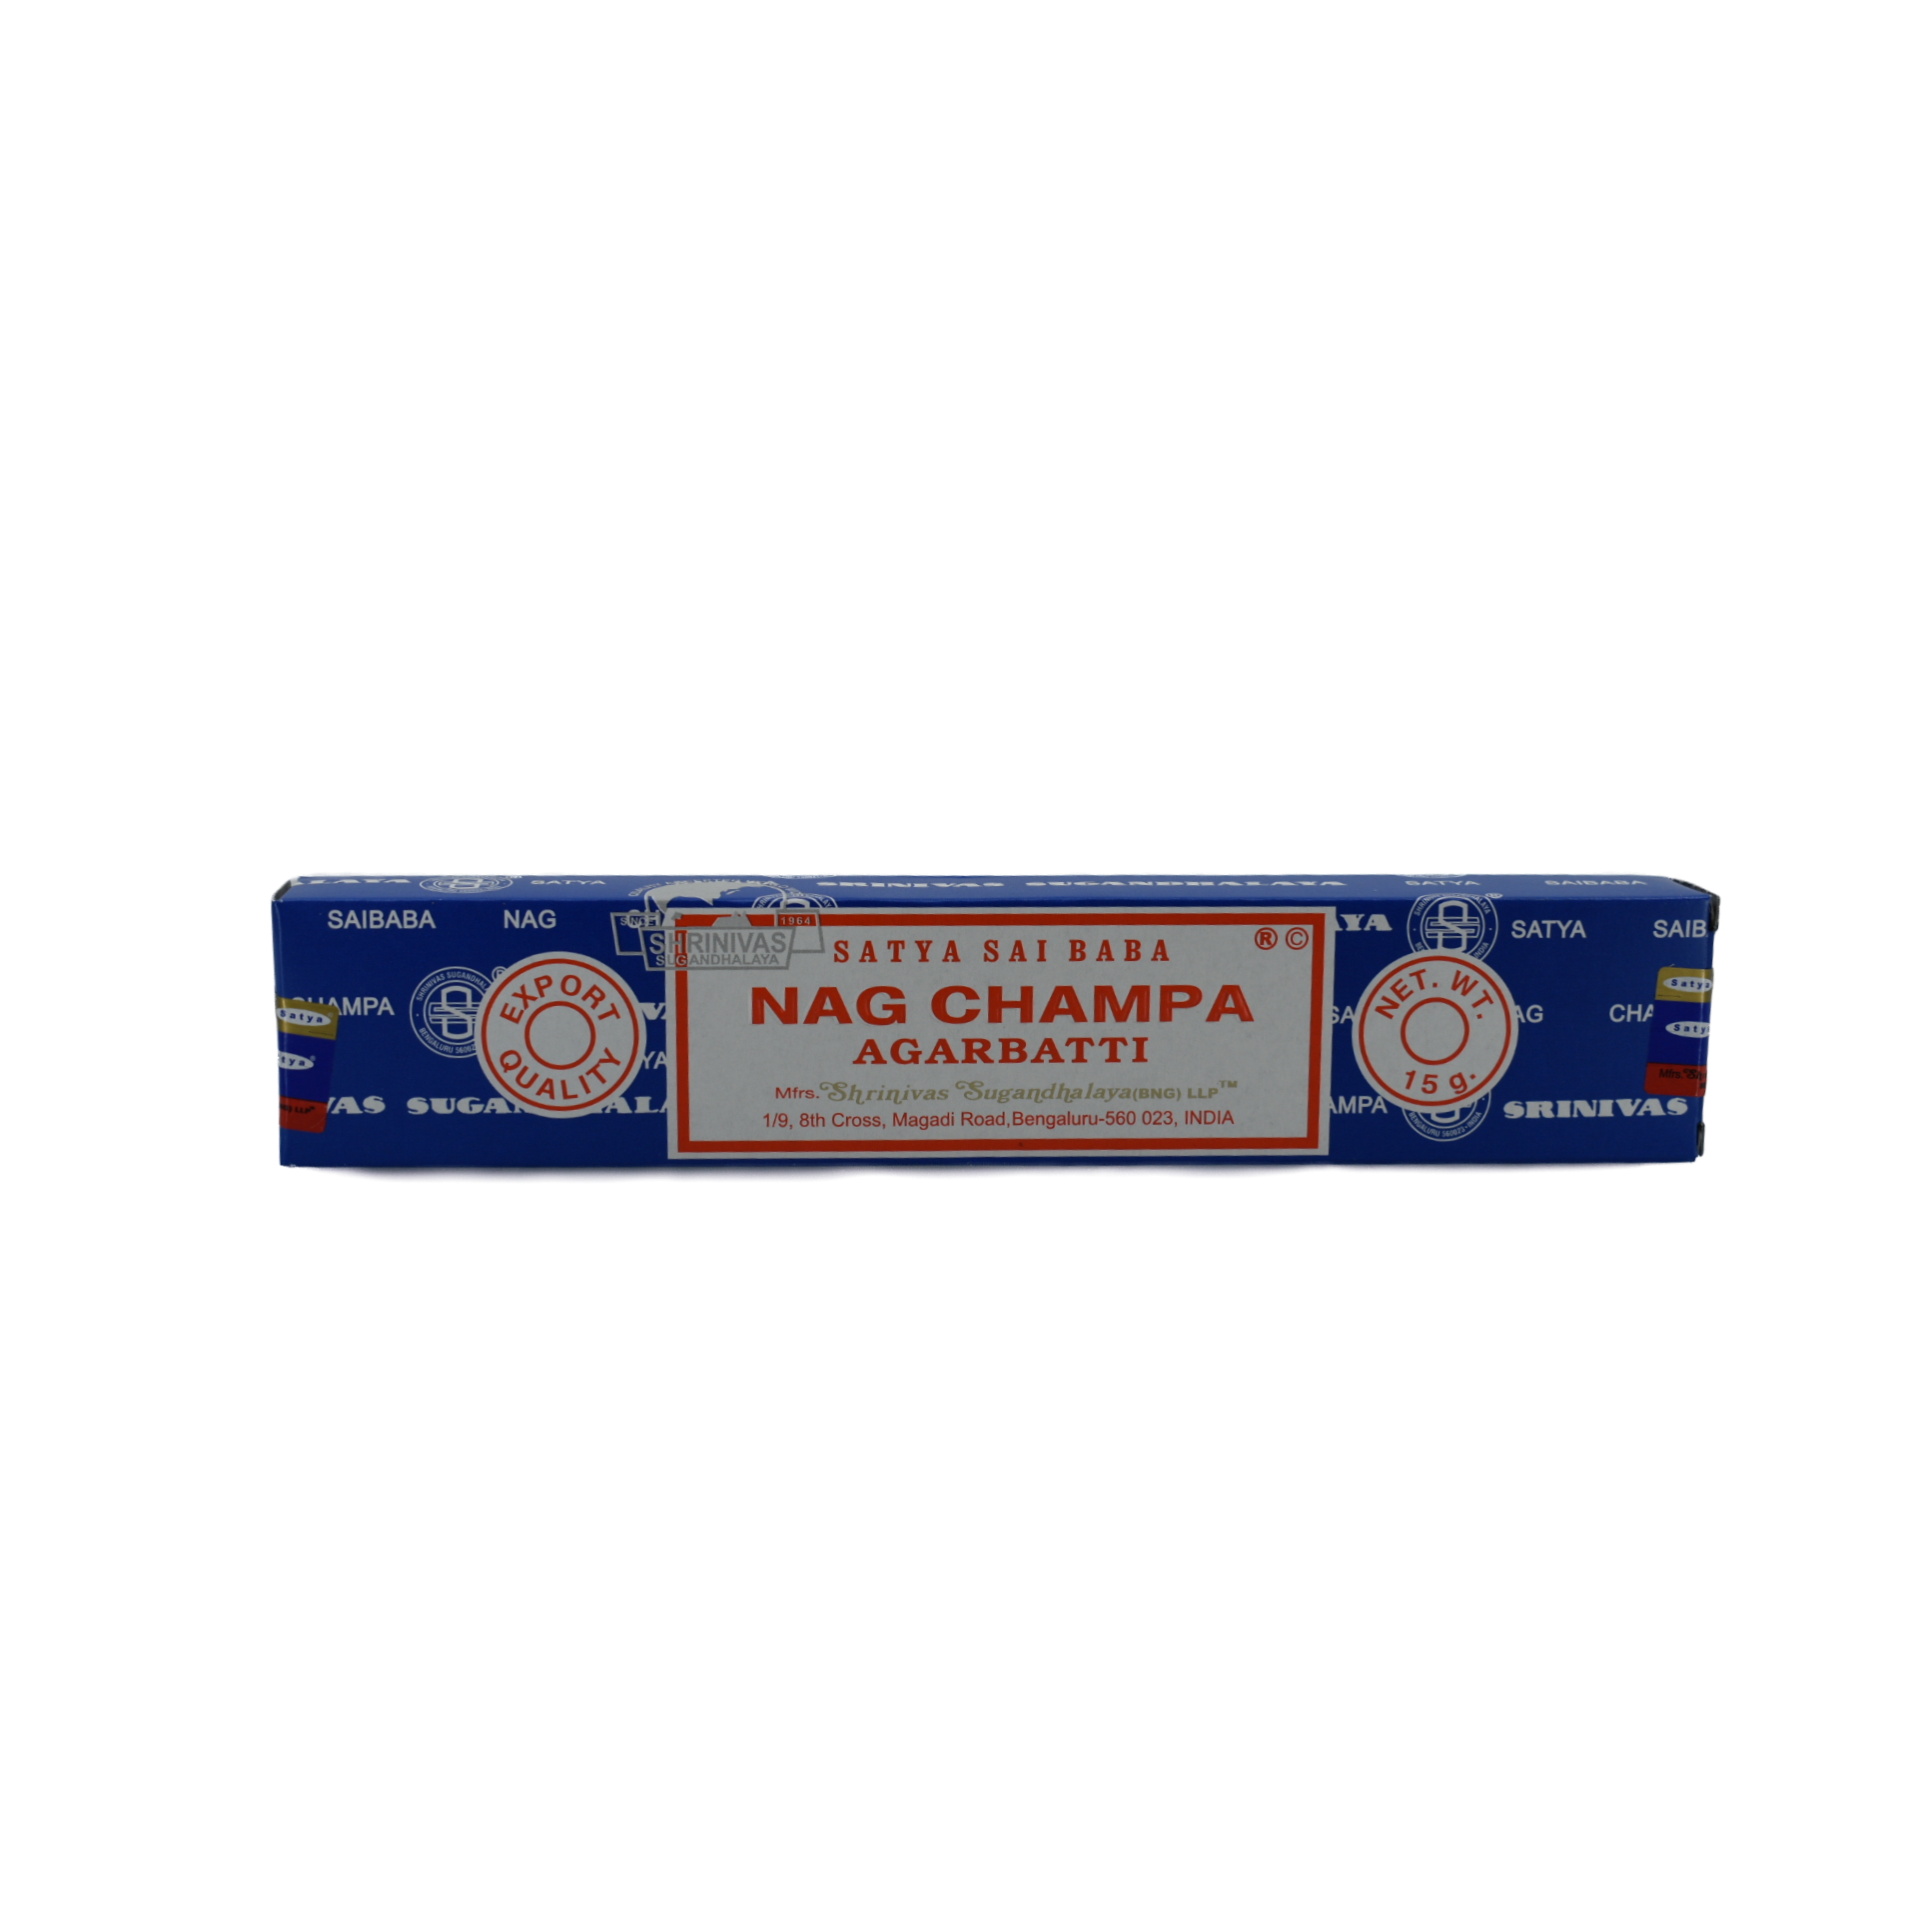 Nag Champa 15gr Sai Baba Incense Sticks. A dark blue box with a white rectangle in the middle. The red lettering and frame just inside the border. The lettering has the company name and title; Satya Sai Baba, Nag Champa, Agarbatti. Below the title is the manufacturer&